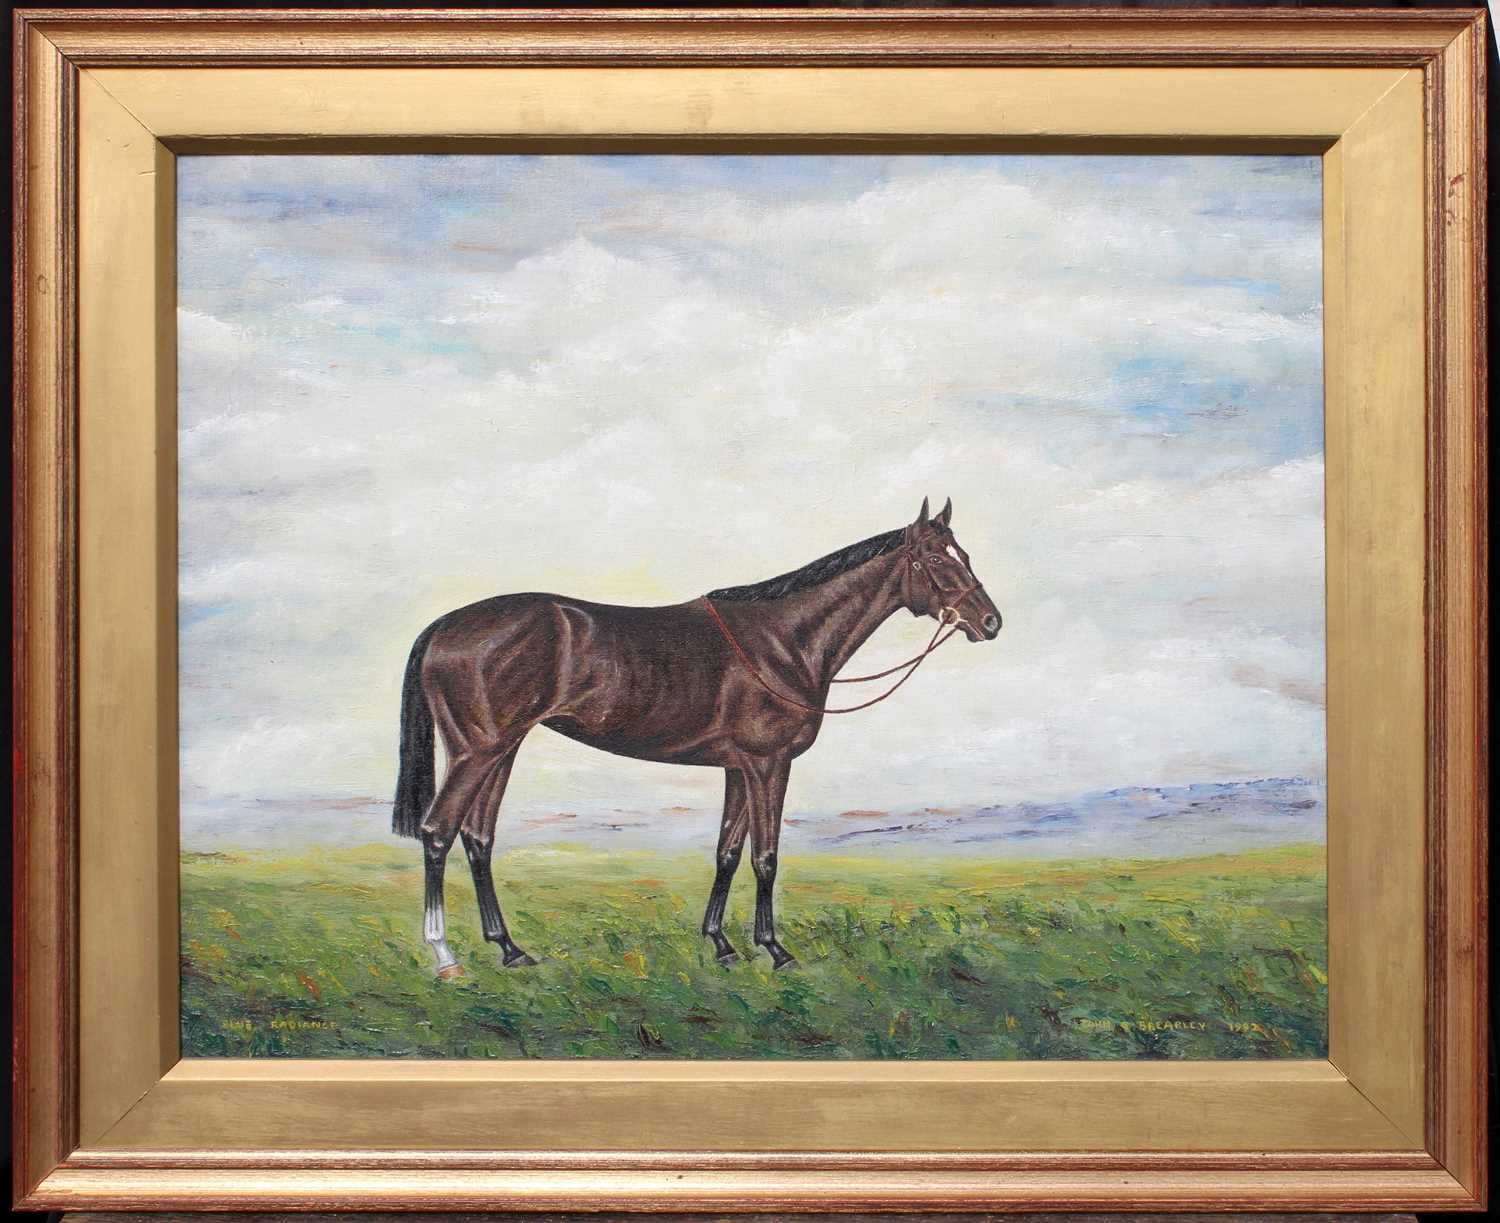 John G Brearley (Contemporary) "Blue Radience" Study of a dark bay horse in an extensive landscape - Image 2 of 2